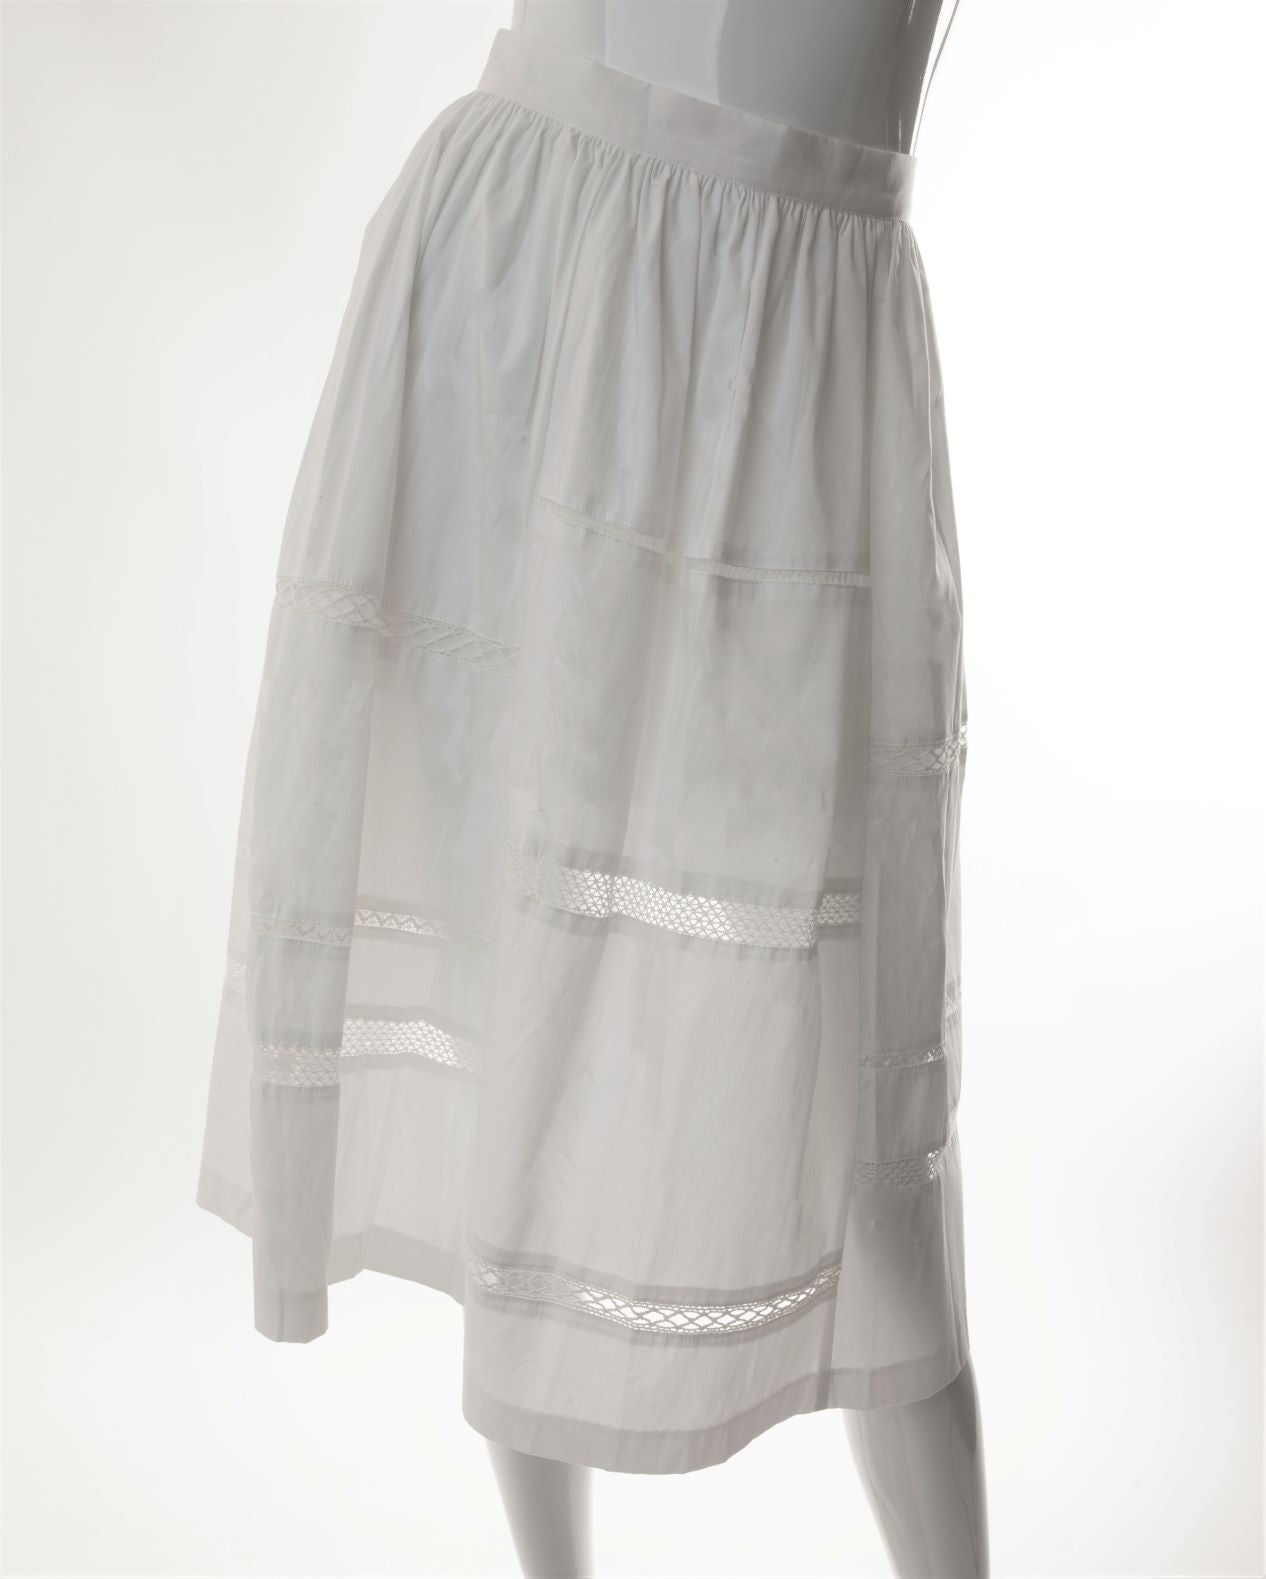 Atelier Nicole Miller - Cotton Full Skirt with Lace Inserts